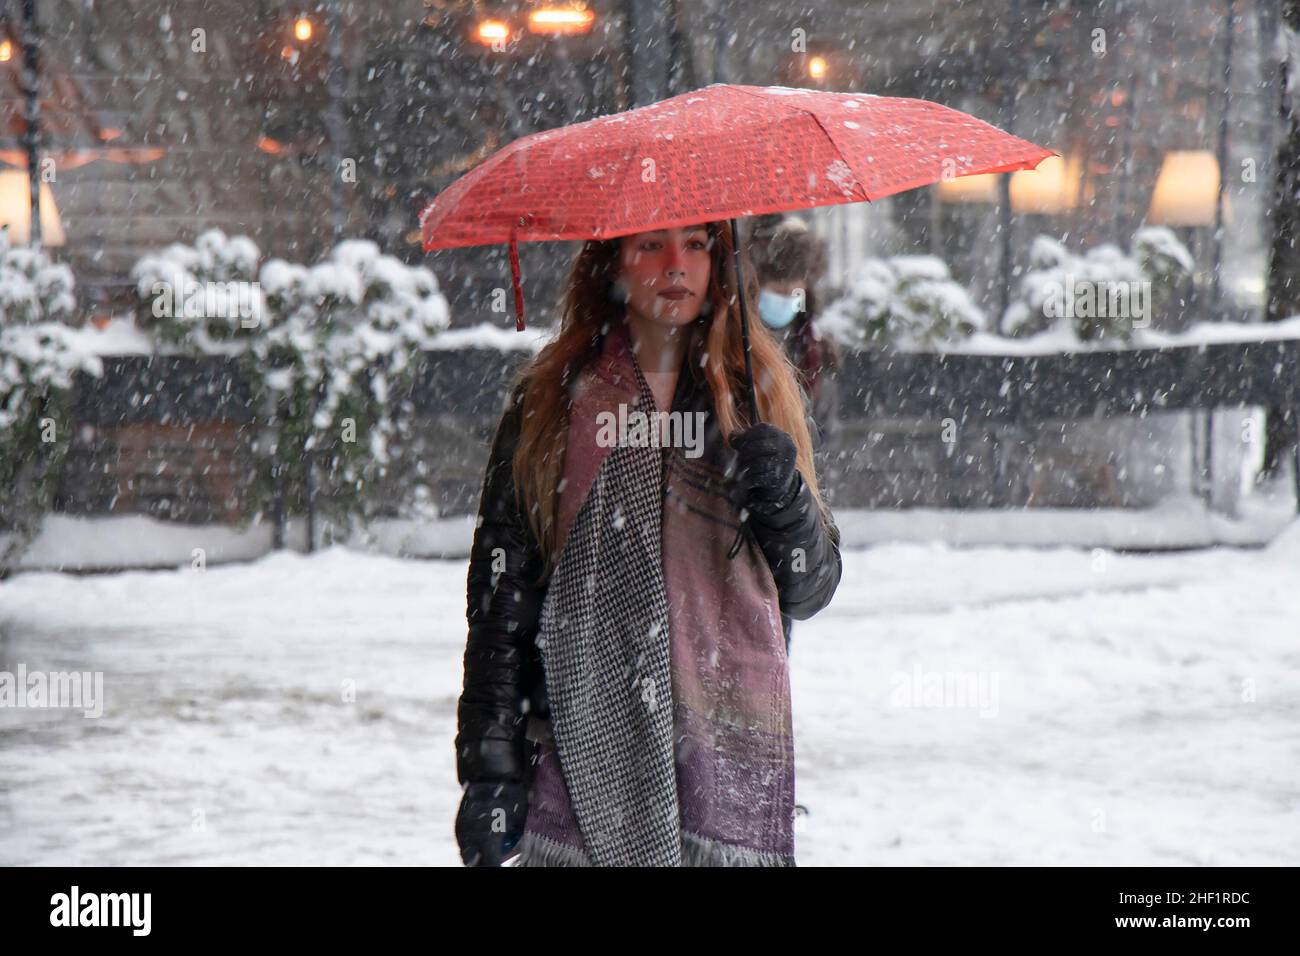 Belgrade, Serbia - January 11, 2022: One young woman walking under red umbrella on a snowy winter day in the city Stock Photo